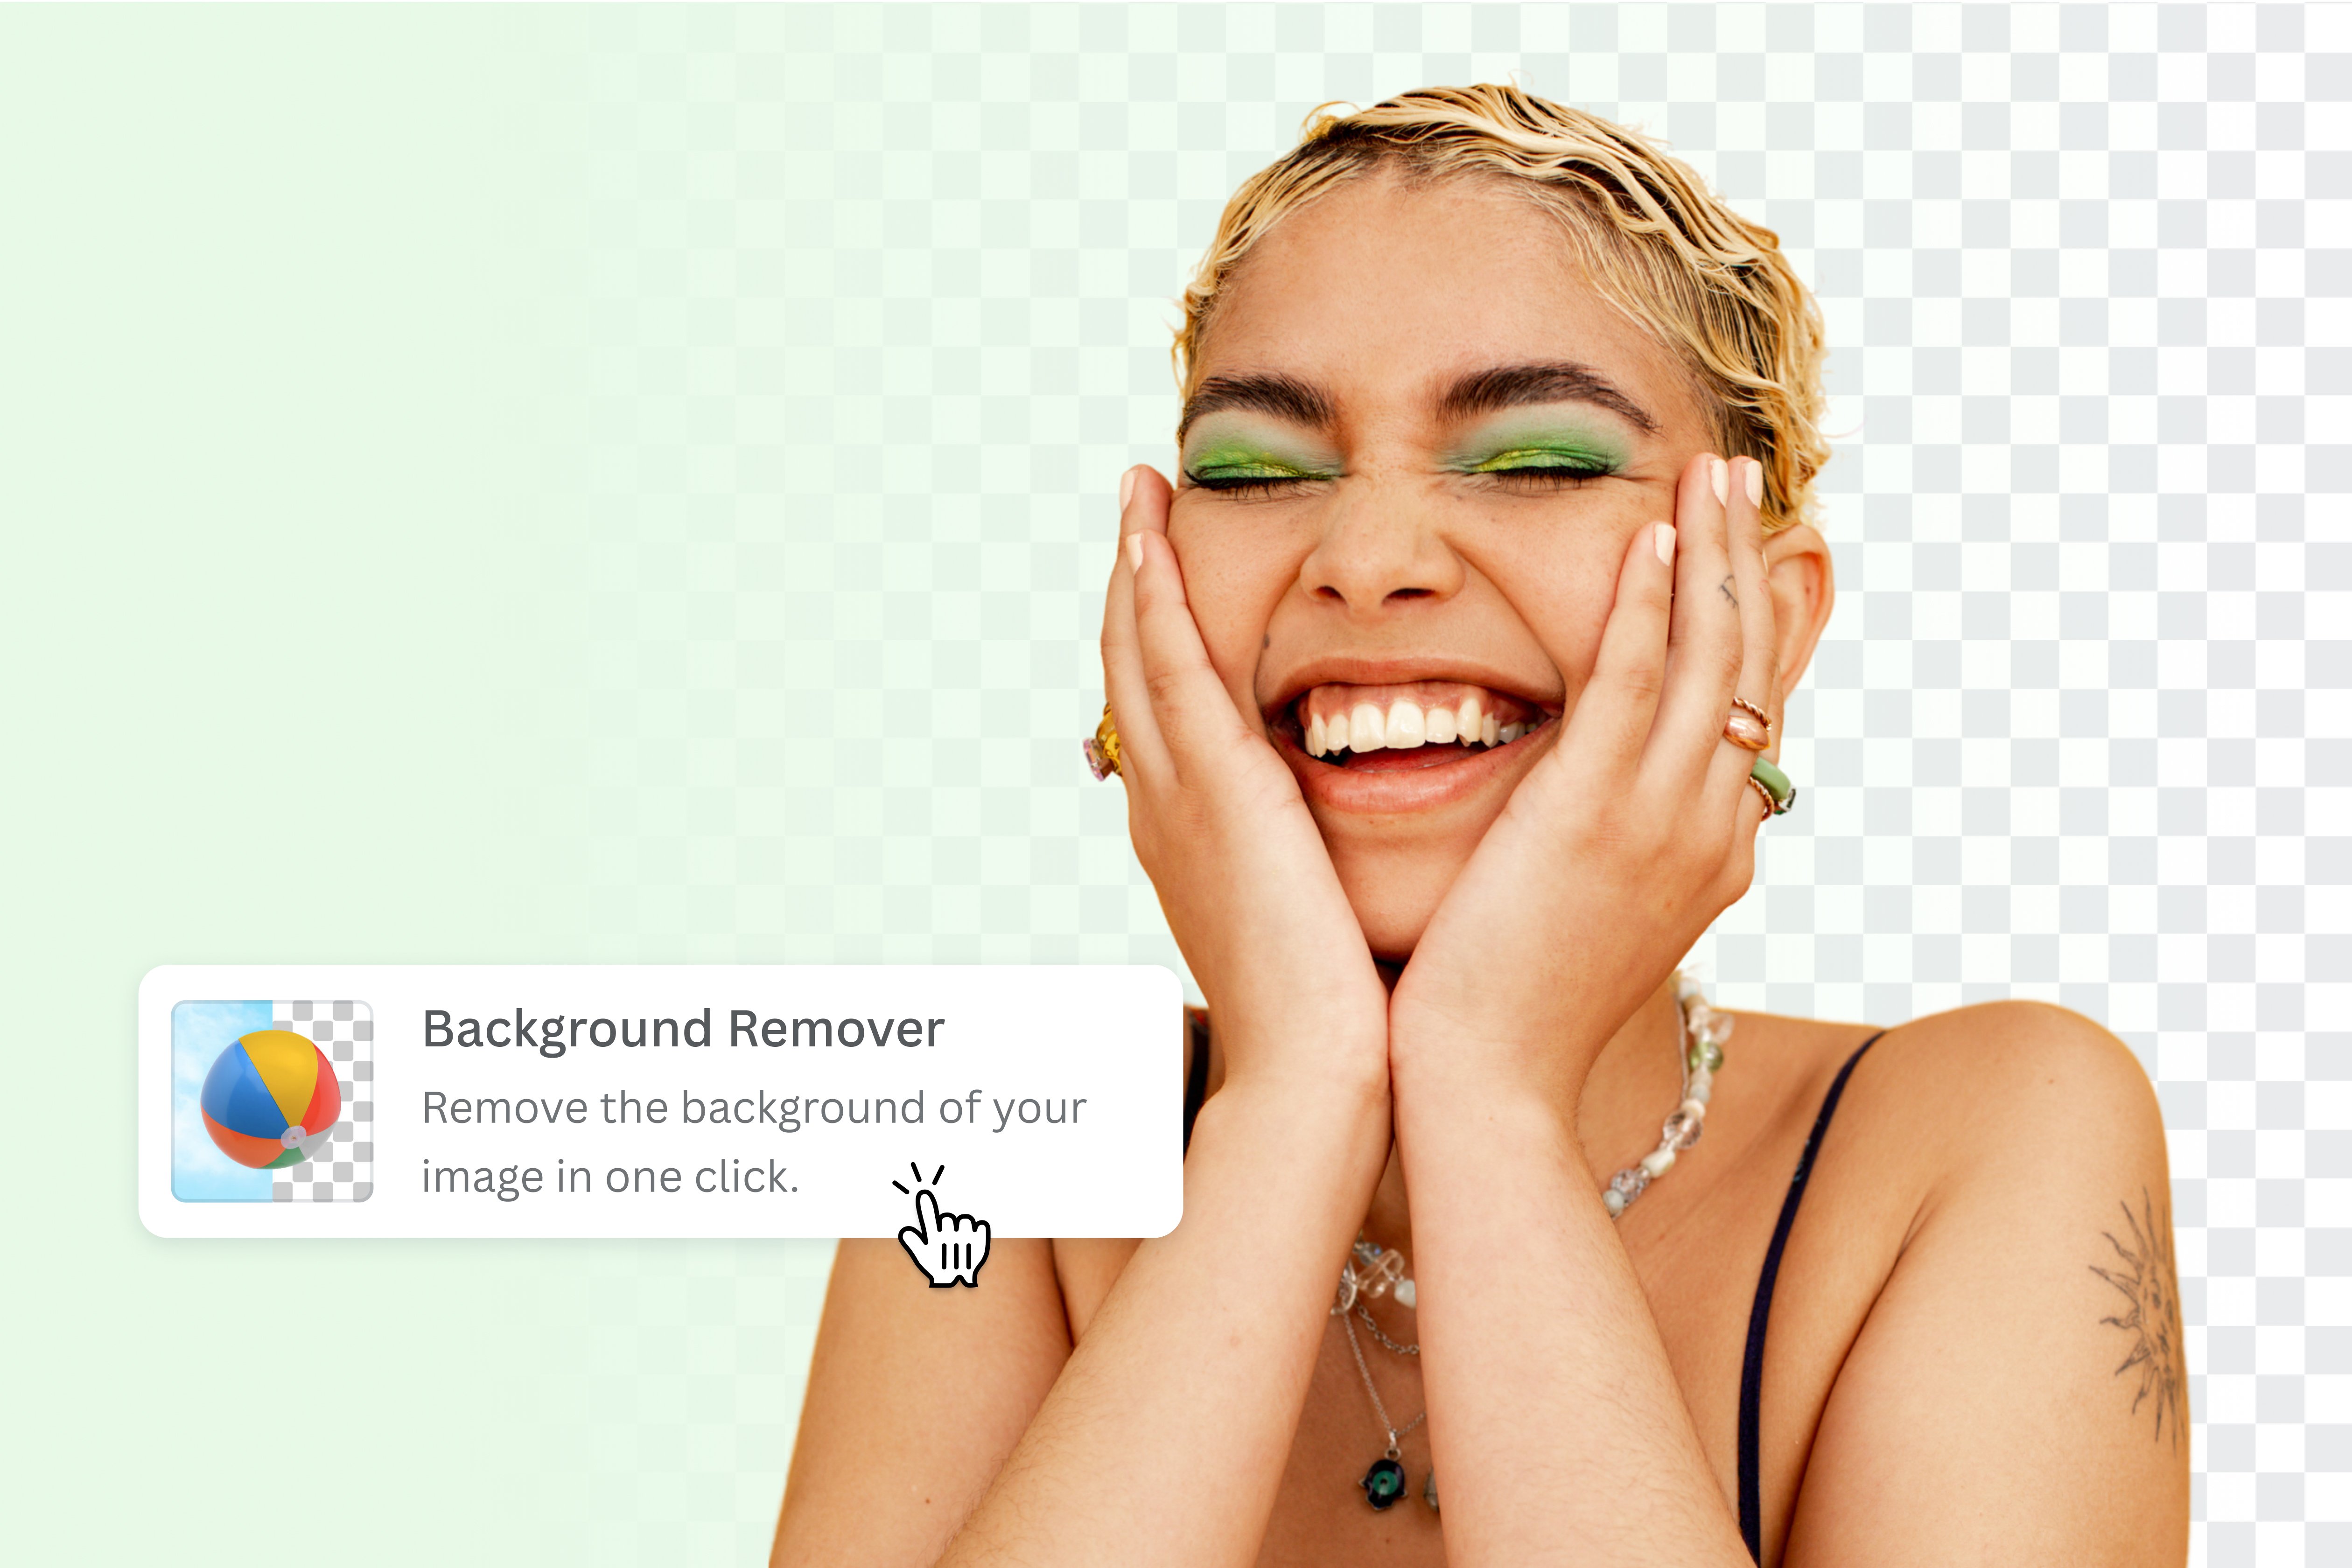 How to use background remover